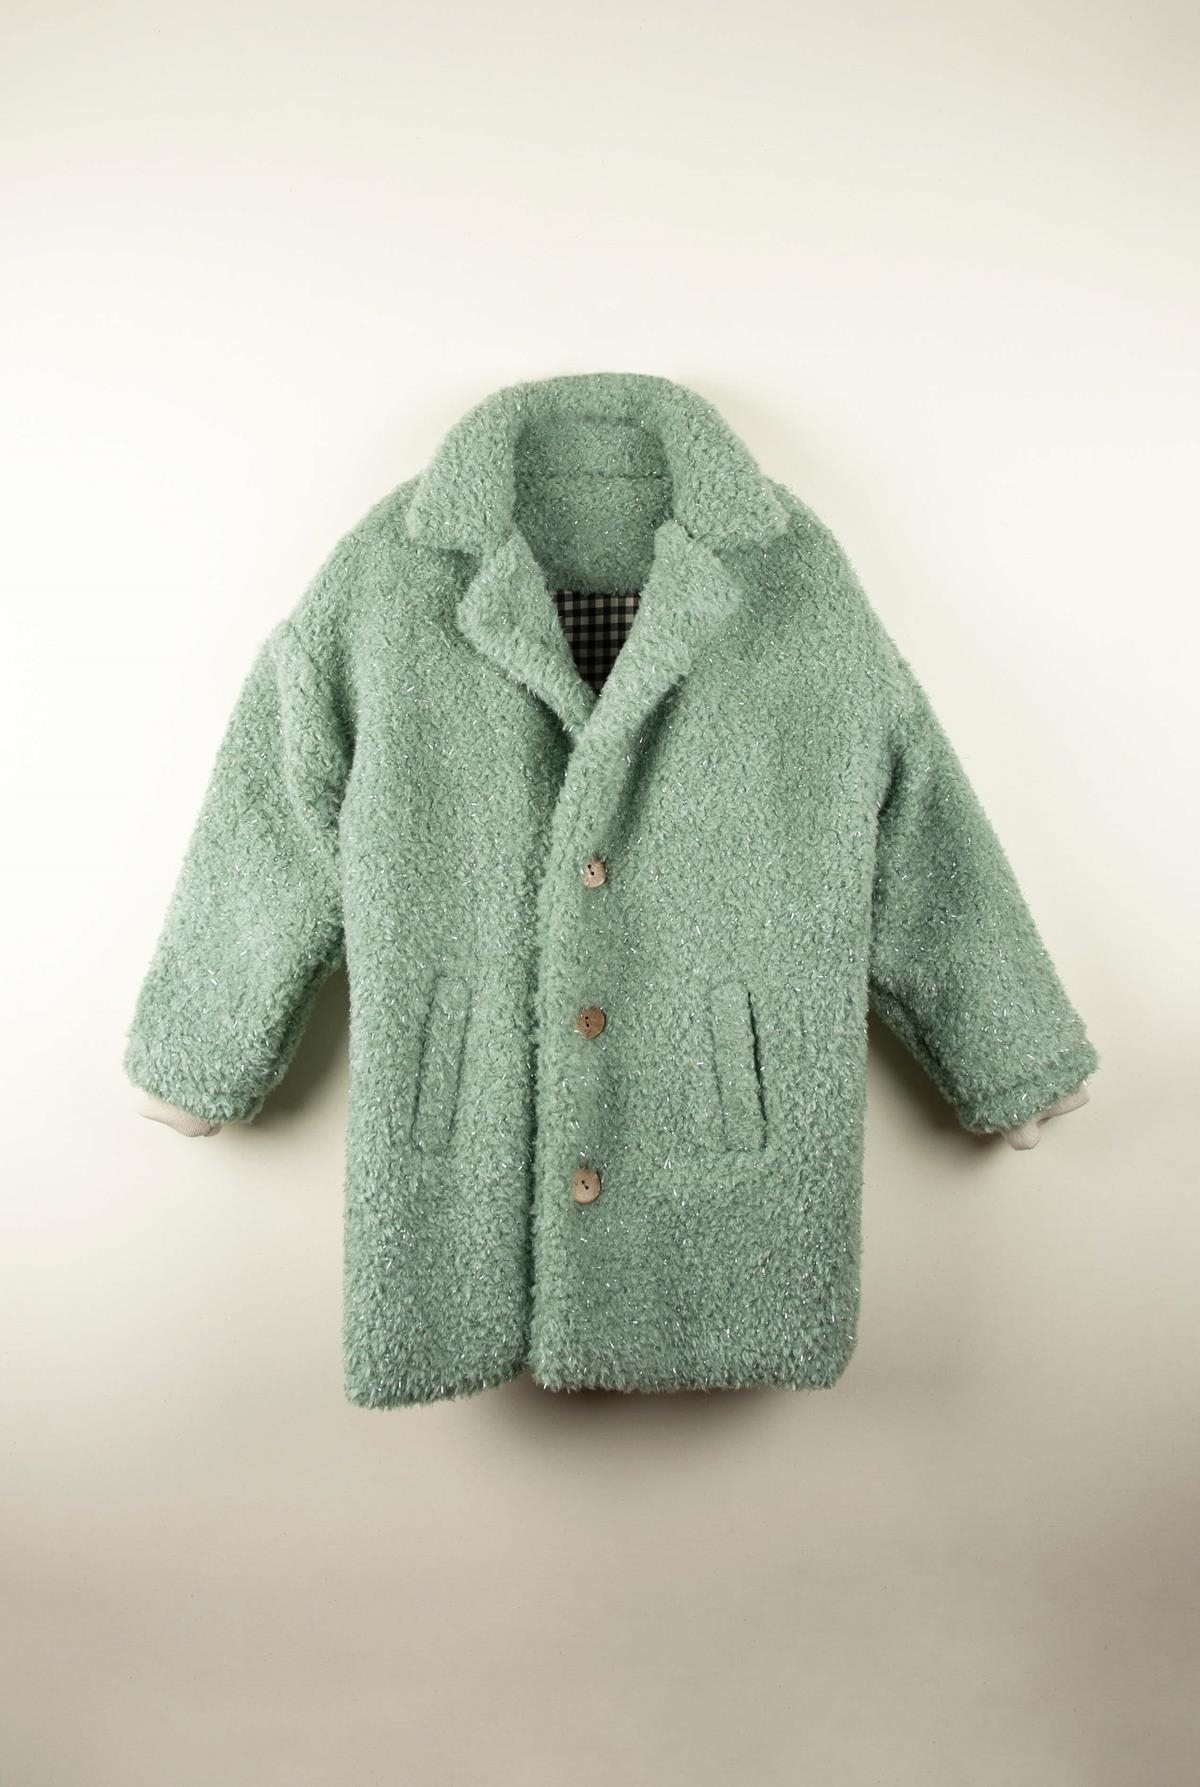 Mod.39.1 Green coat with lapel | AW21.22 Mod.39.1 Green coat with lapel | 1